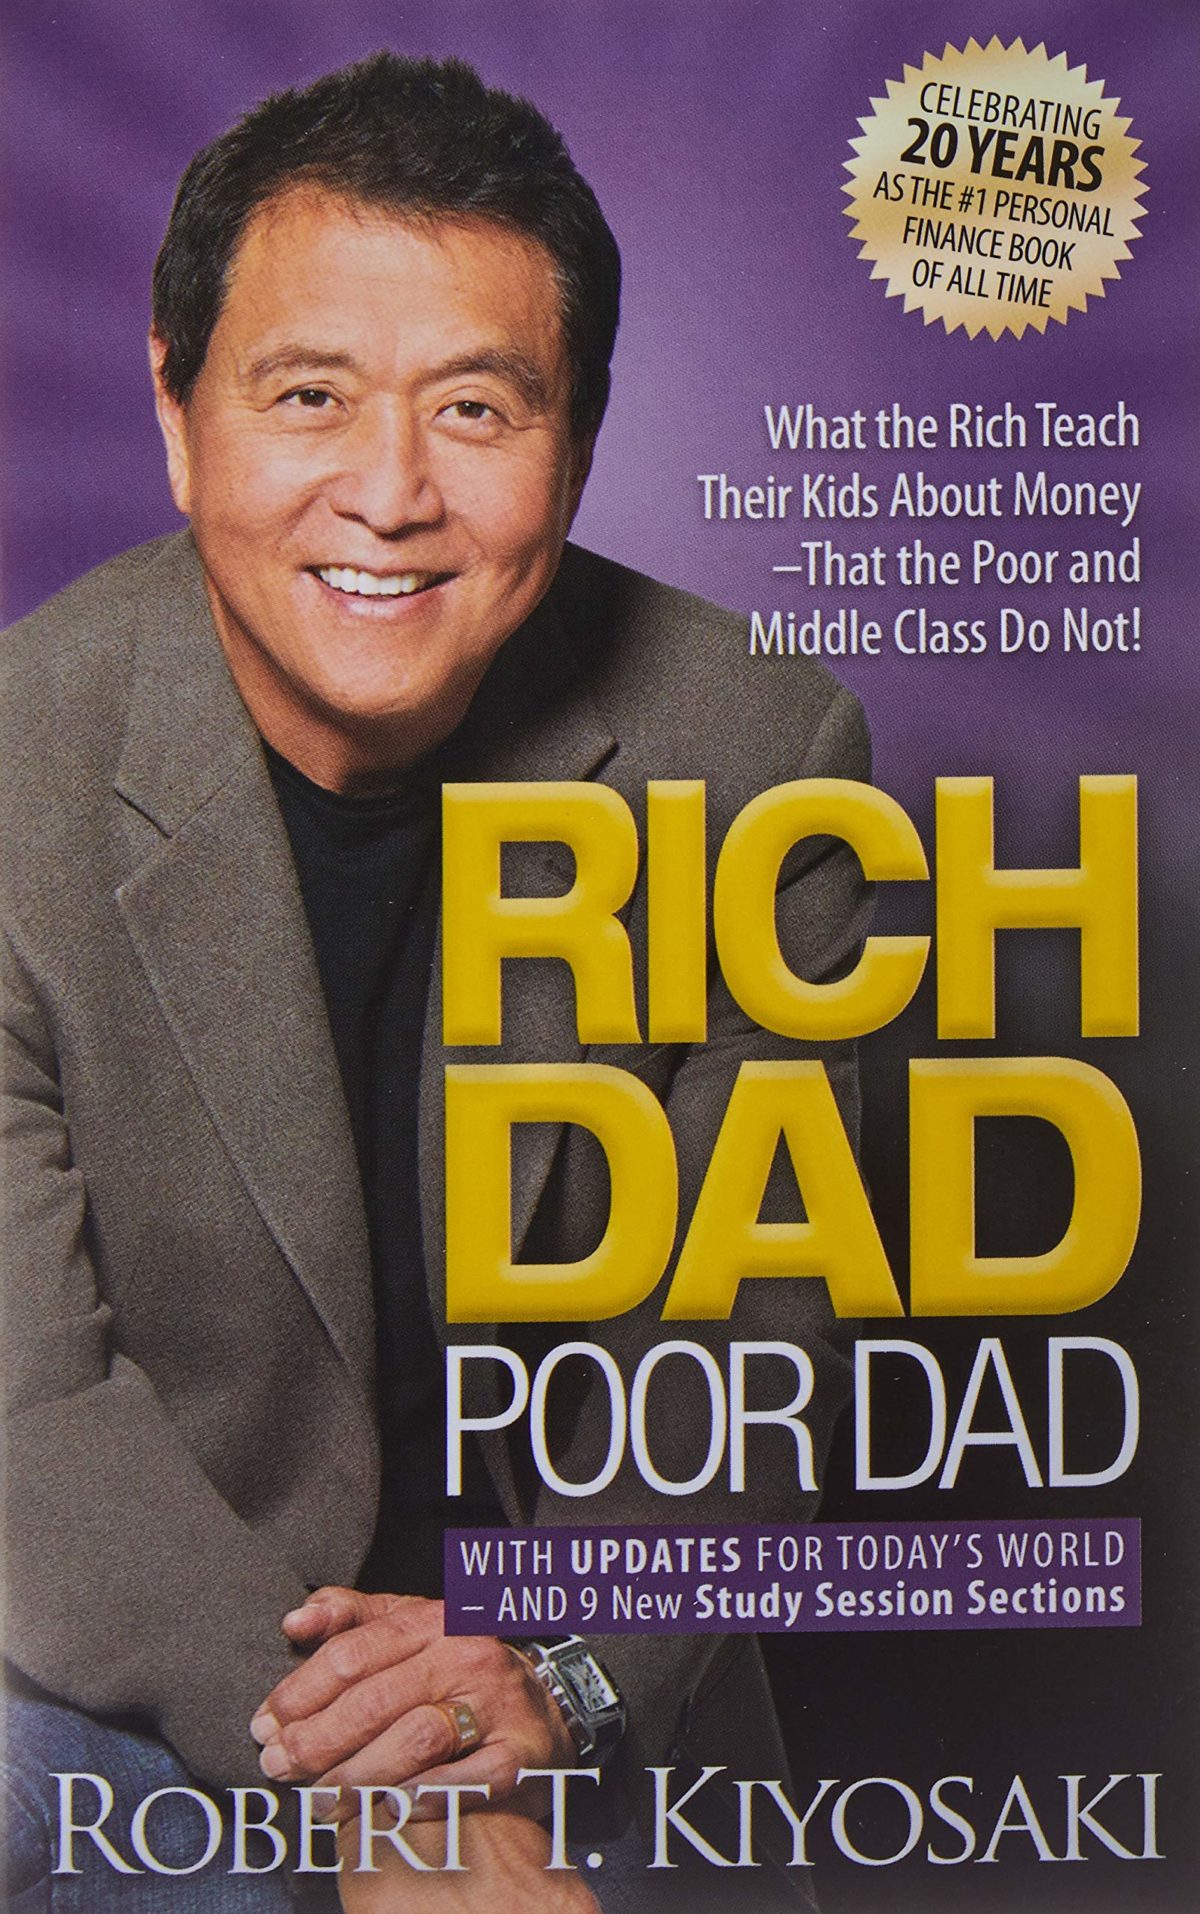 5 Takeaways from “Rich Dad Poor Dad”